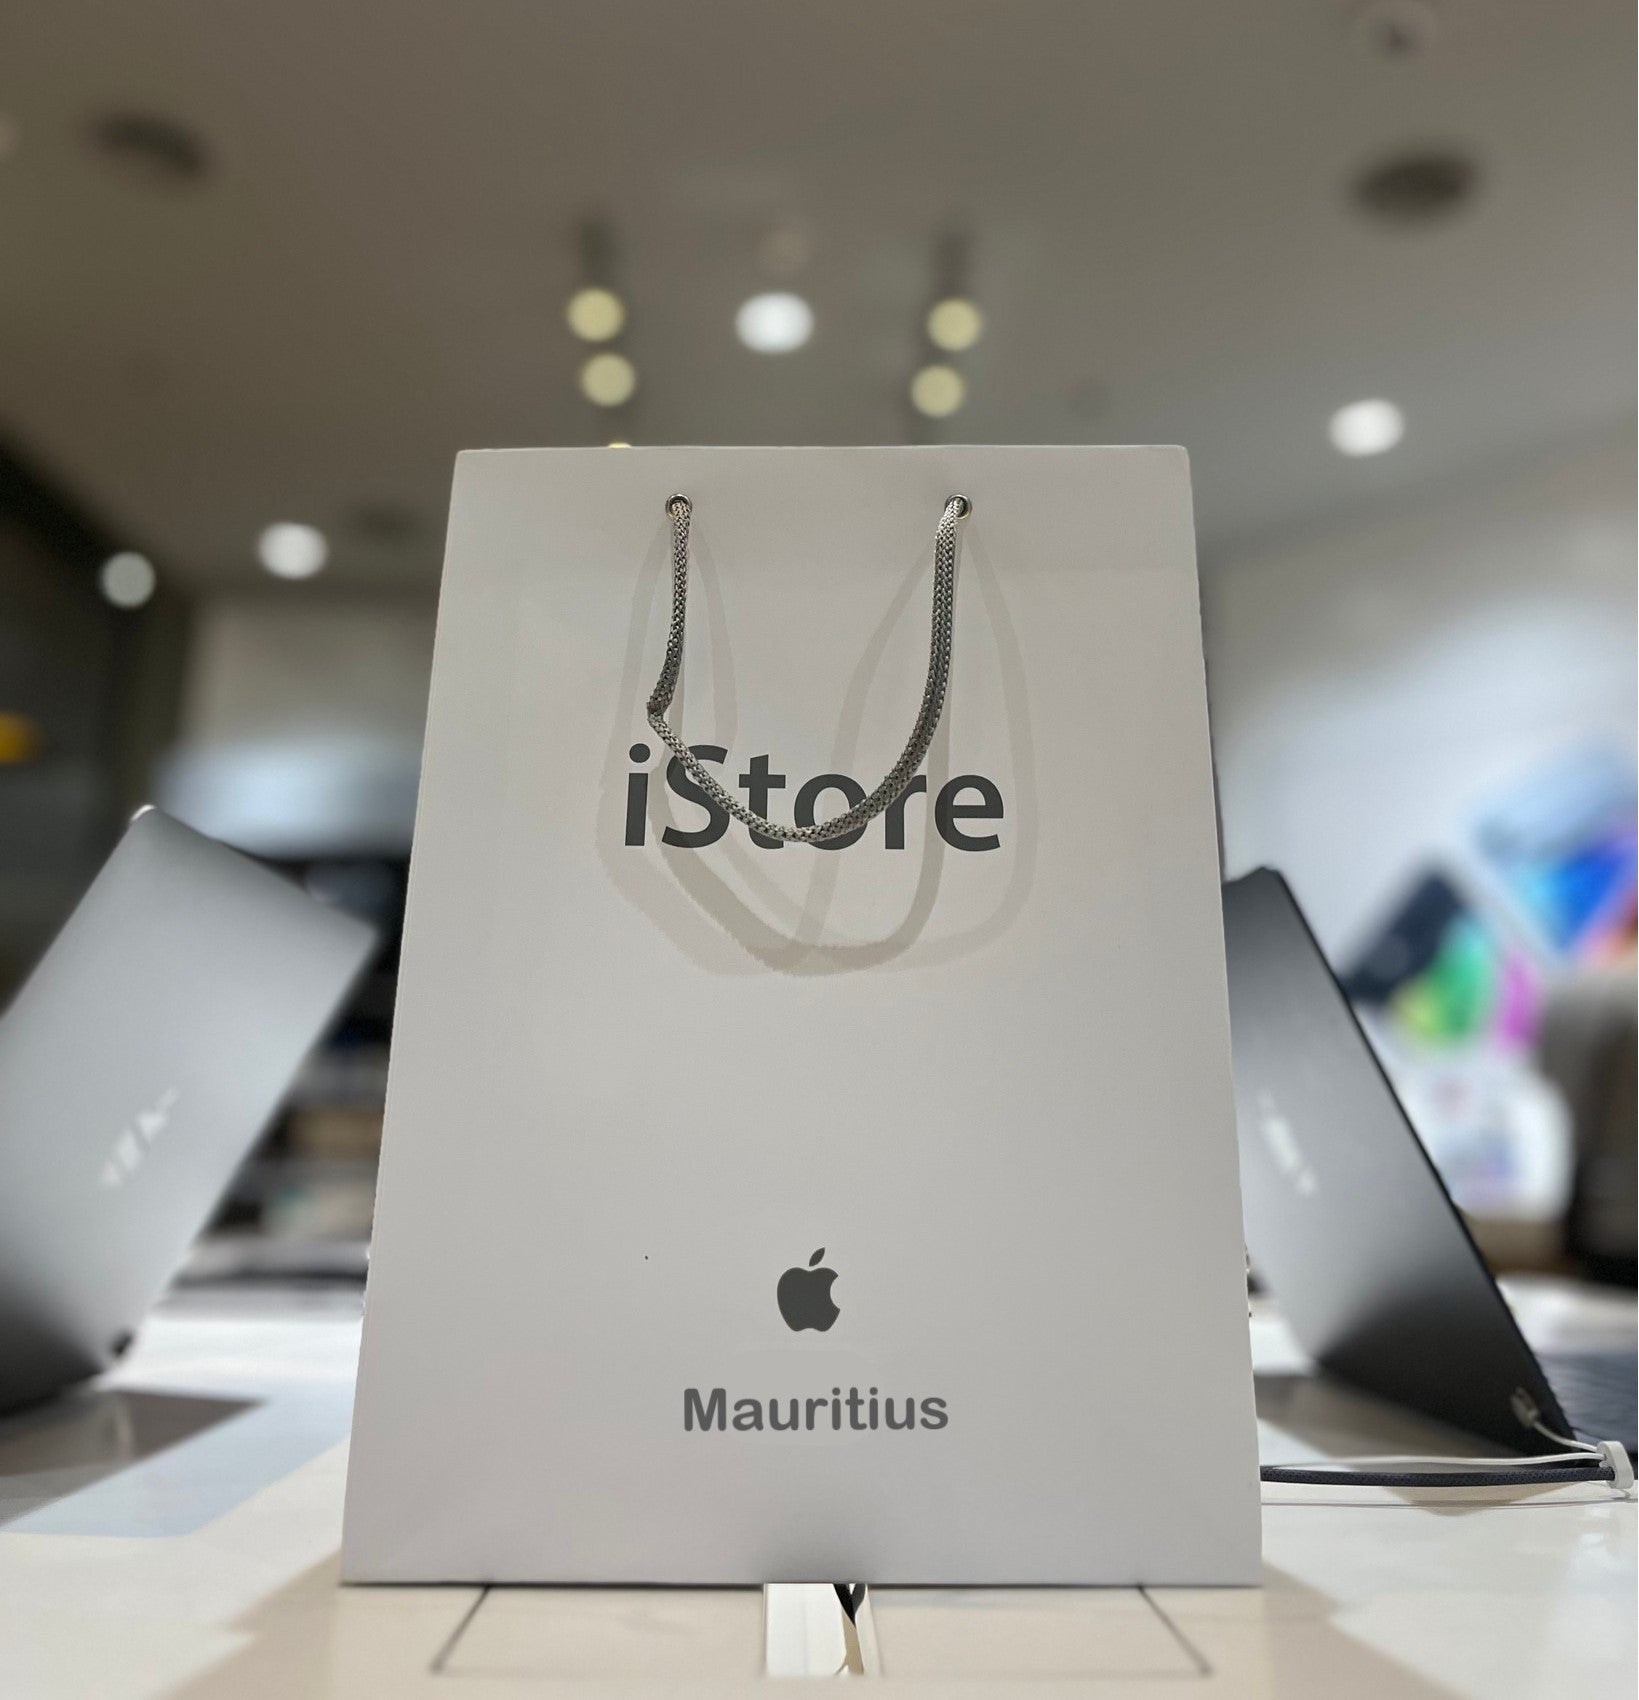 Upgrade your Apple experience. Discover the latest products at iStore Mauritius.